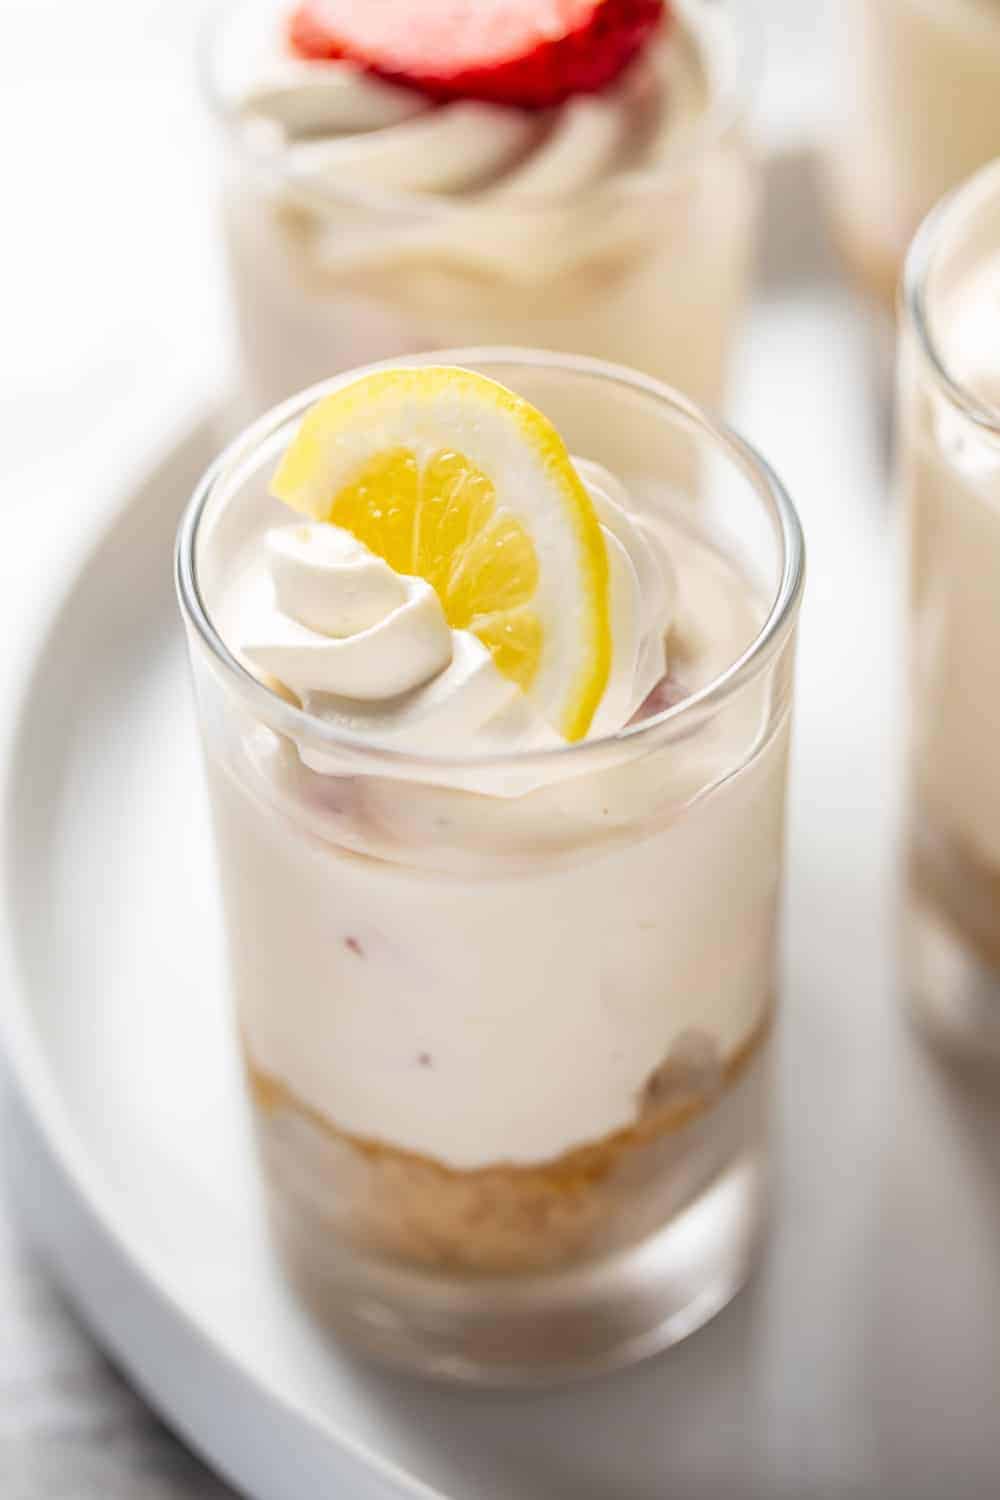 No-bake strawberry lemonade cheesecake in a small glass serving dish, topped with whipped cream and a lemon slice